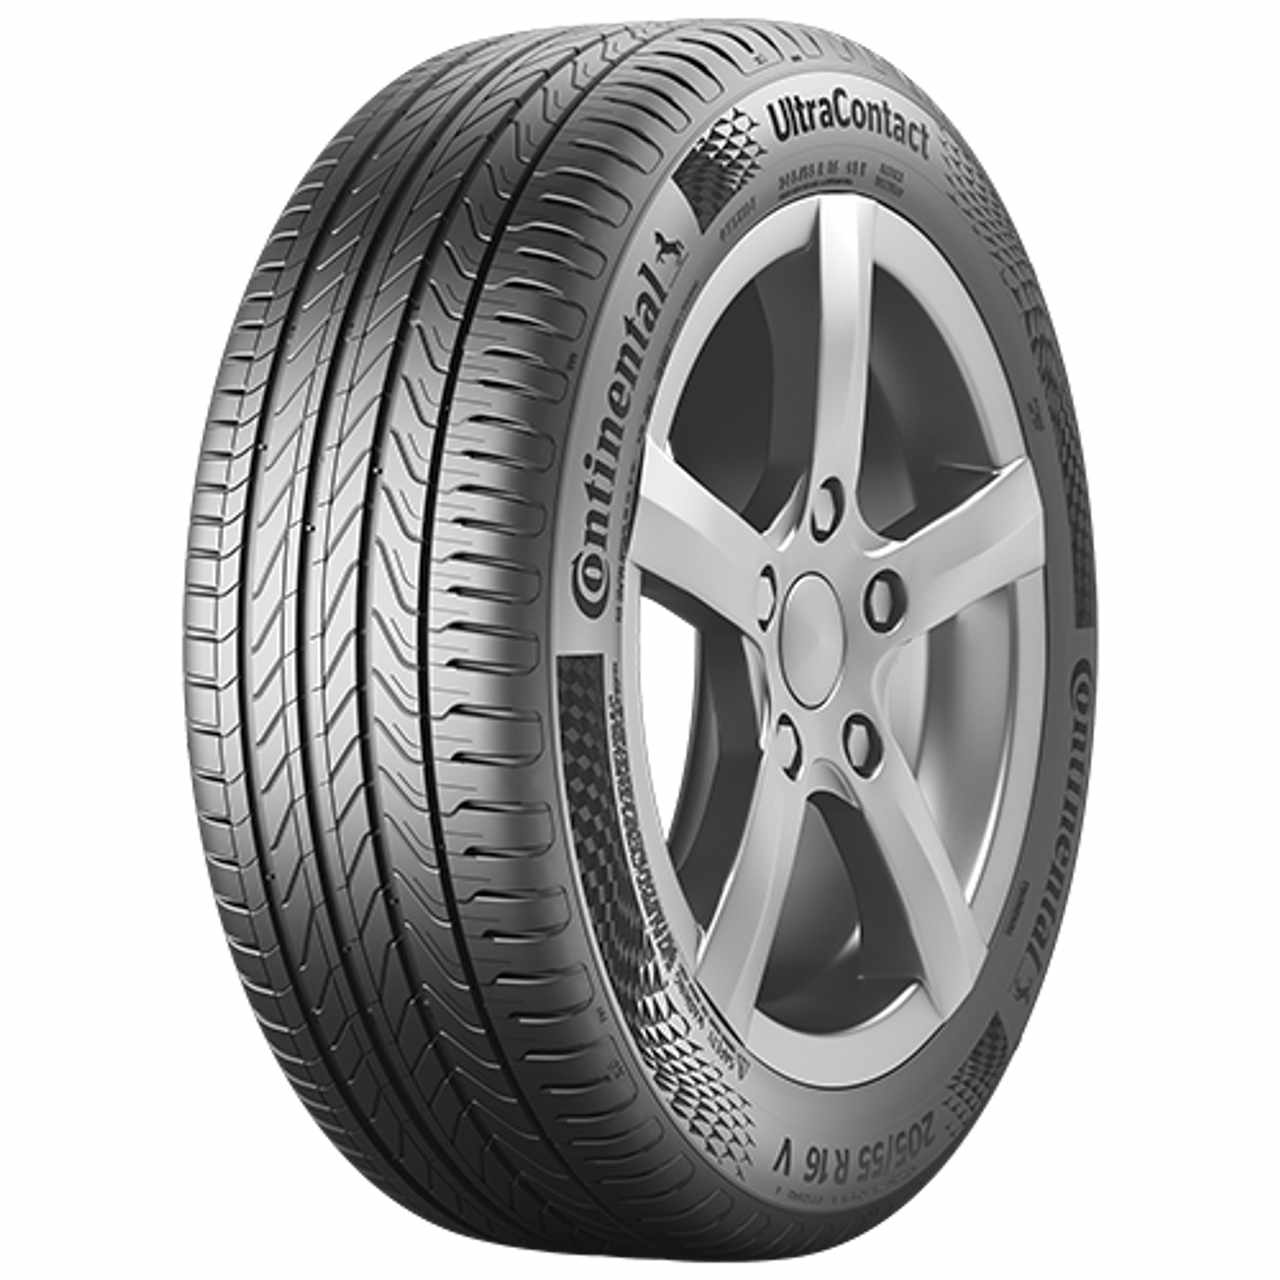 CONTINENTAL ULTRACONTACT (EVc) 195/65R15 91H BSW